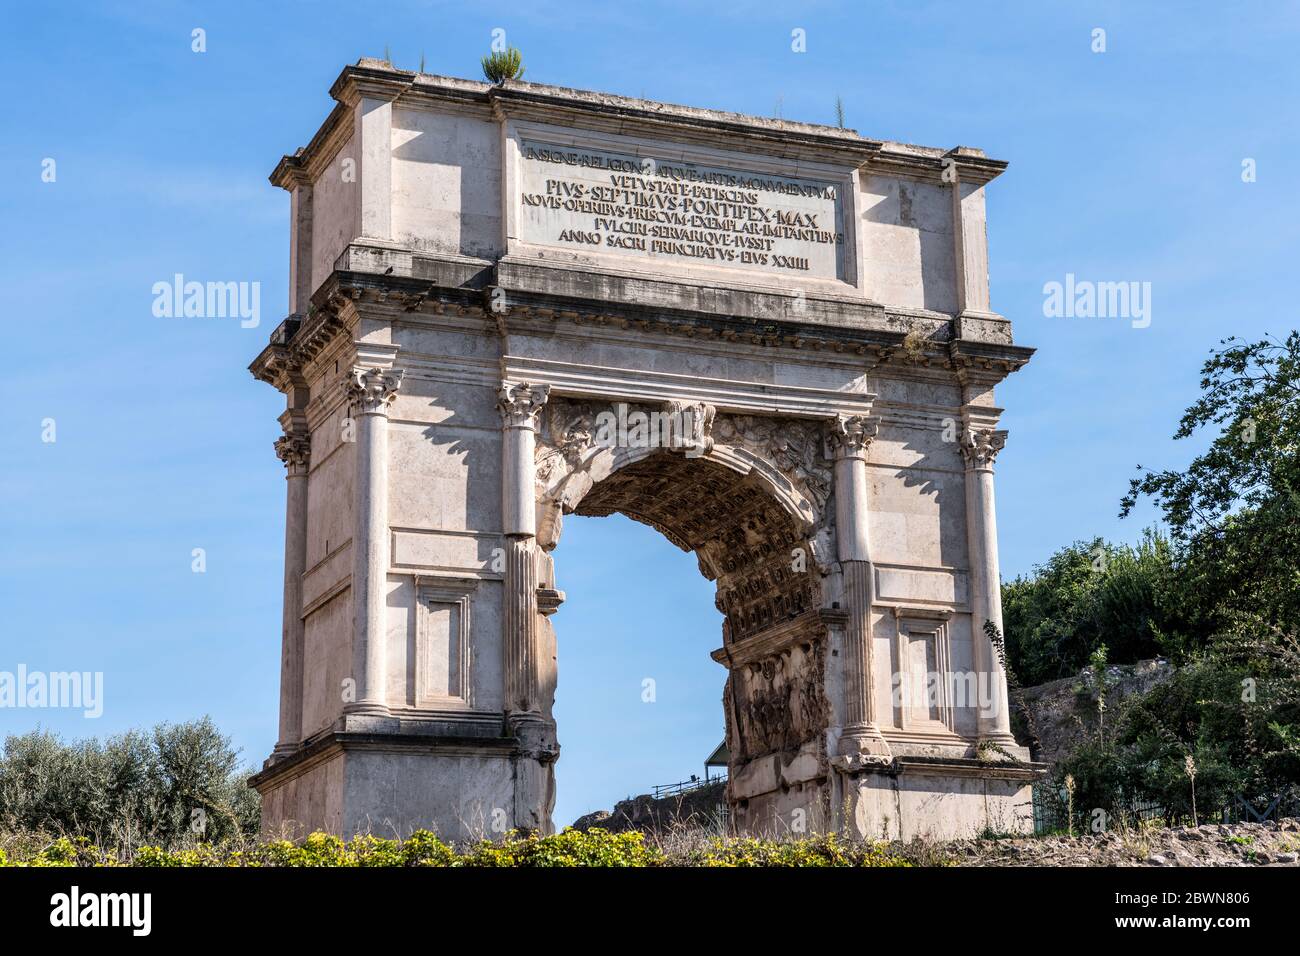 Arch of Titus - A closeup view of west side of 1st-century triumphal arch, Arch of Titus, in Roman Forum. Rome, Italy. Stock Photo